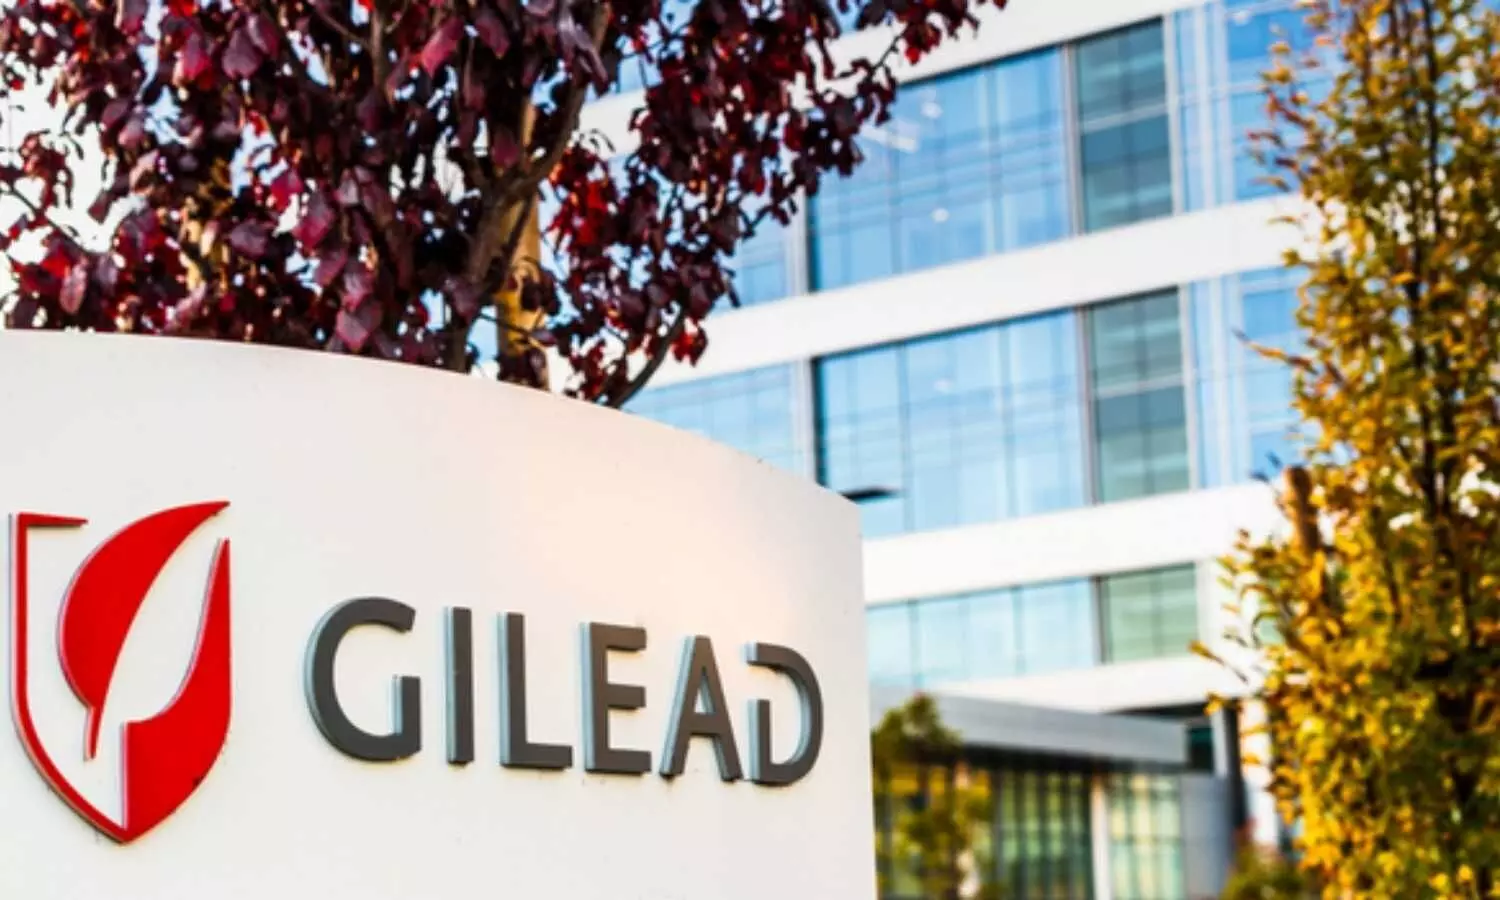 Gilead Sciences to acquire all remaining rights to potential first-in-class immunotherapy GS-1811 from Jounce Therapeutics